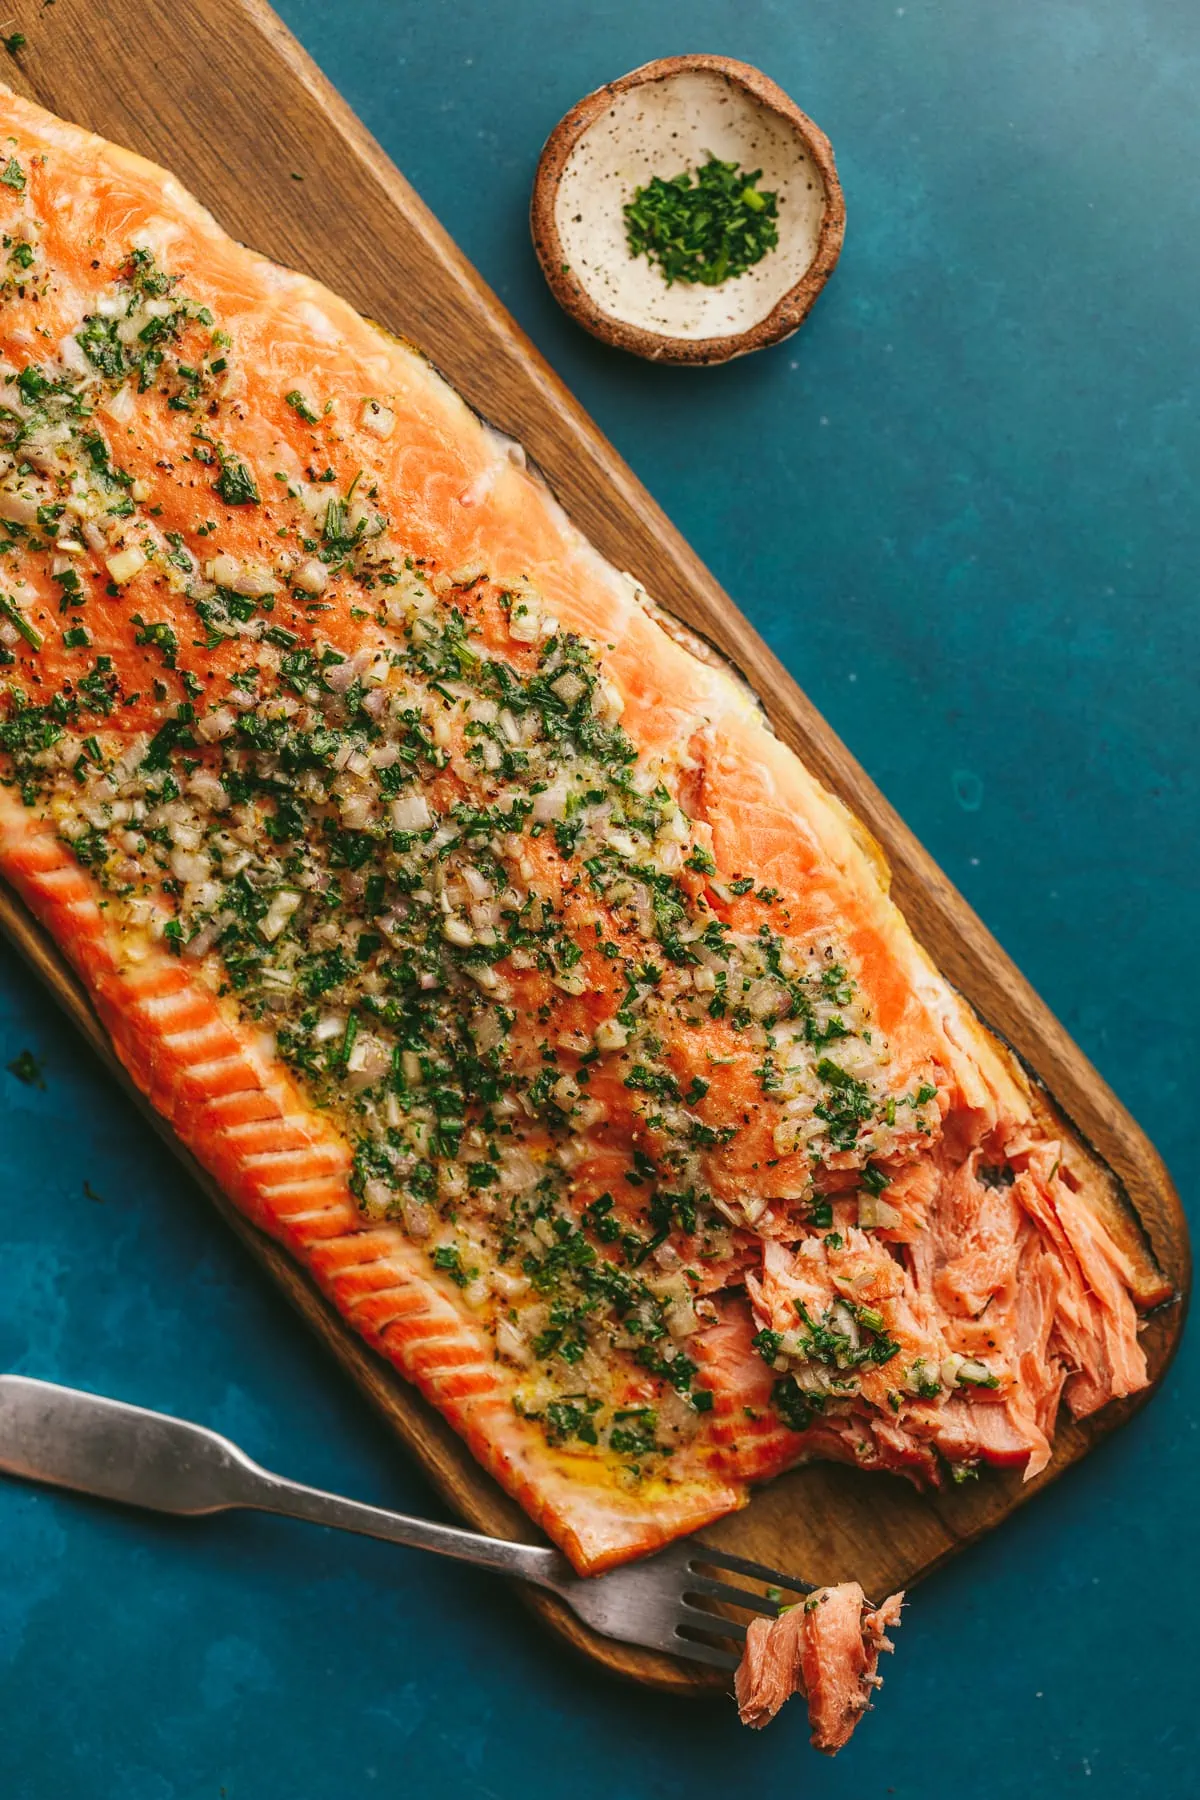 A salmon fillet on a wooden cutting board on a teal backdrop.